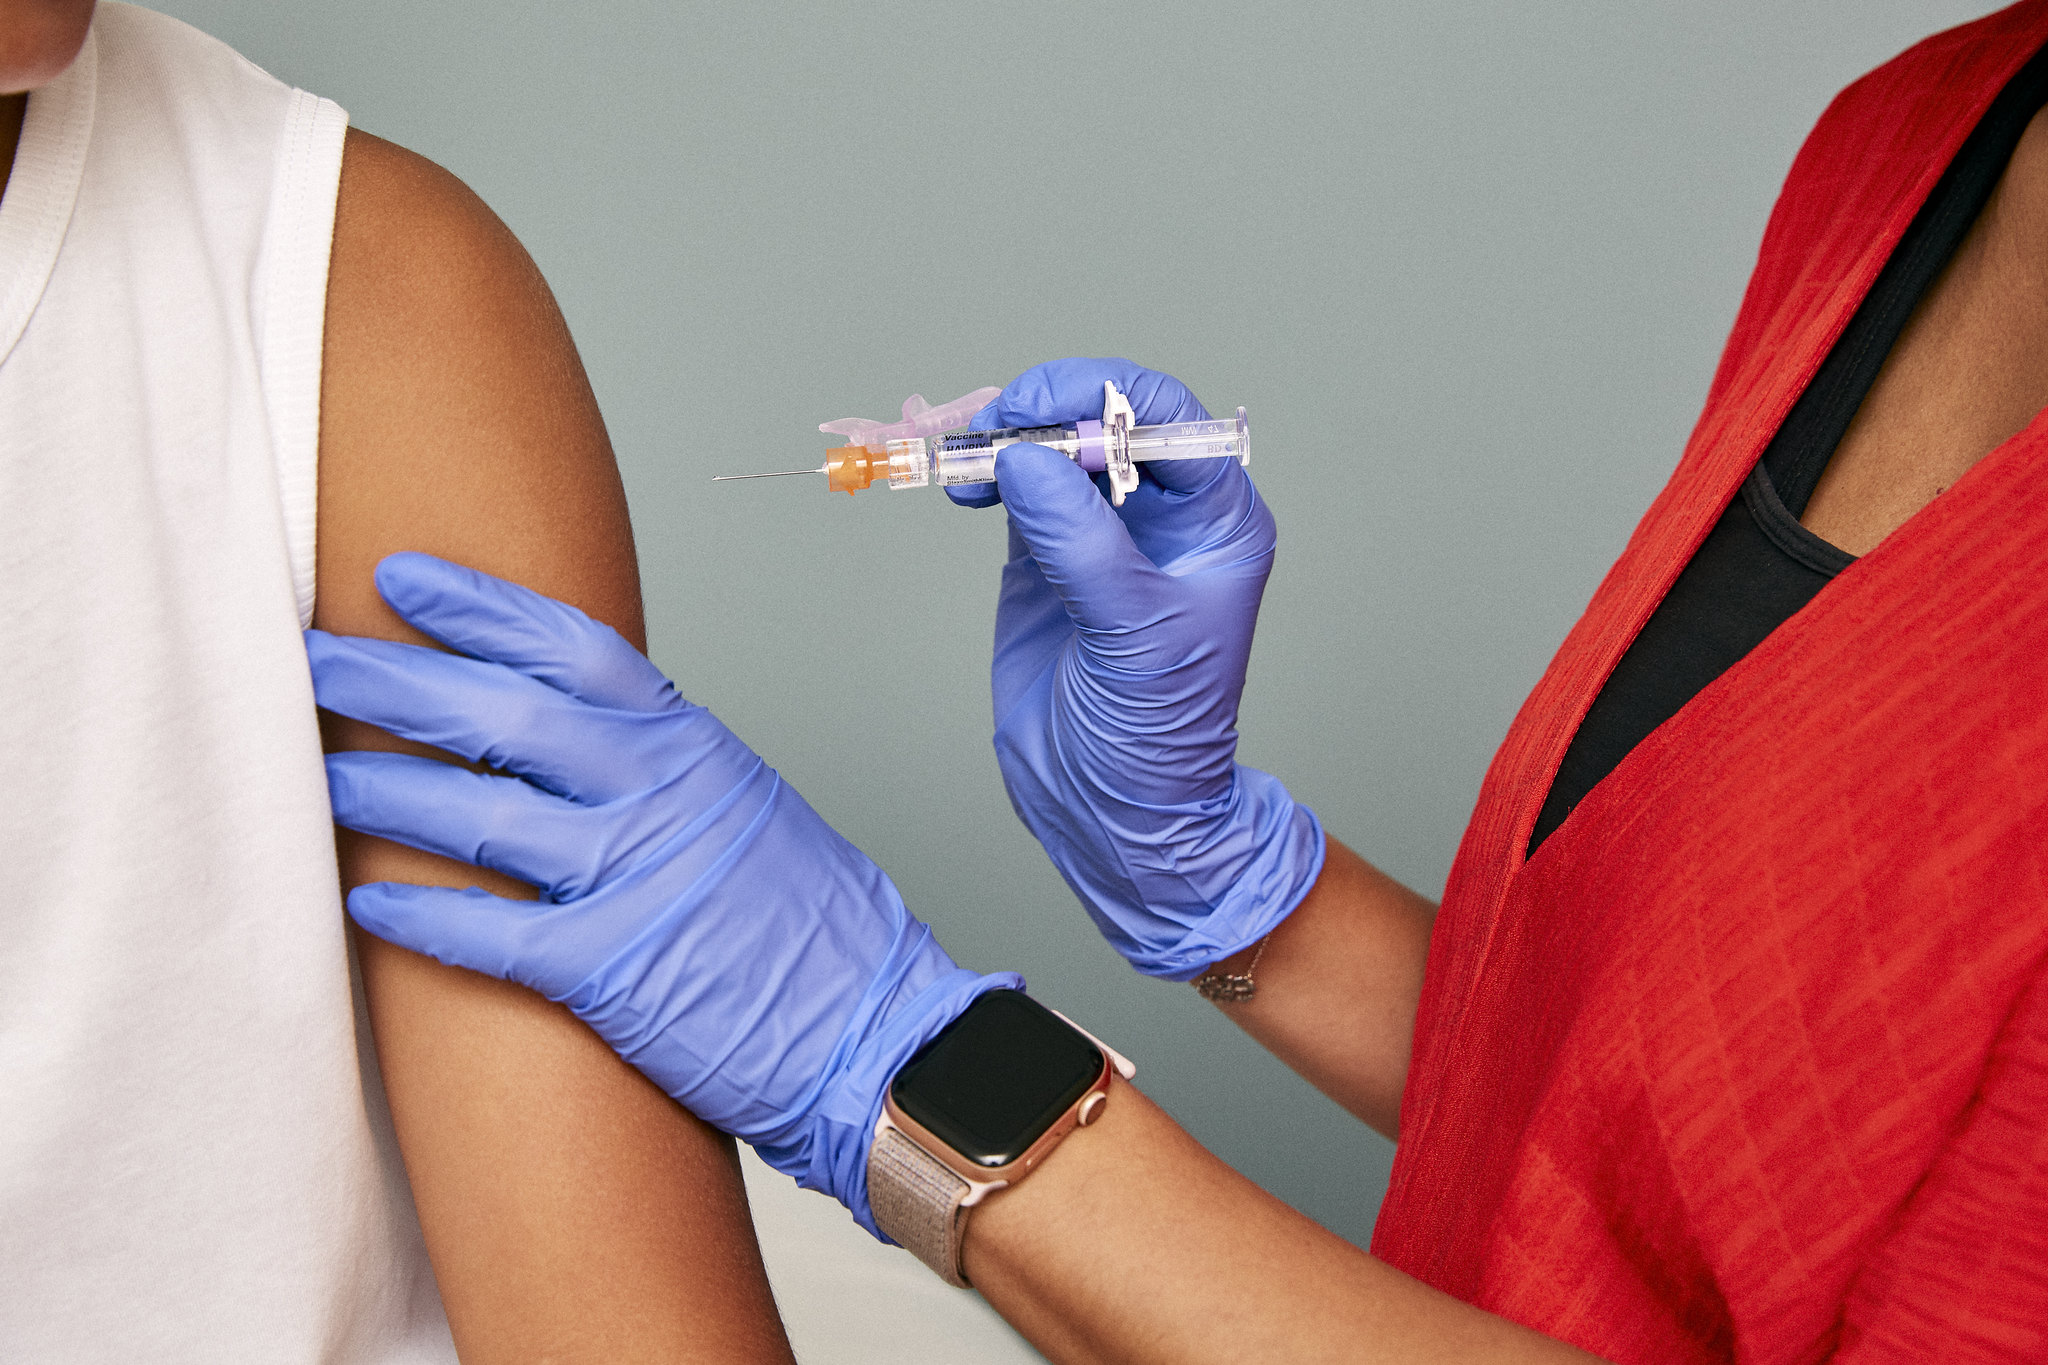 A physician administers a shot. (Credit: SELF Magazine/ Flickr)